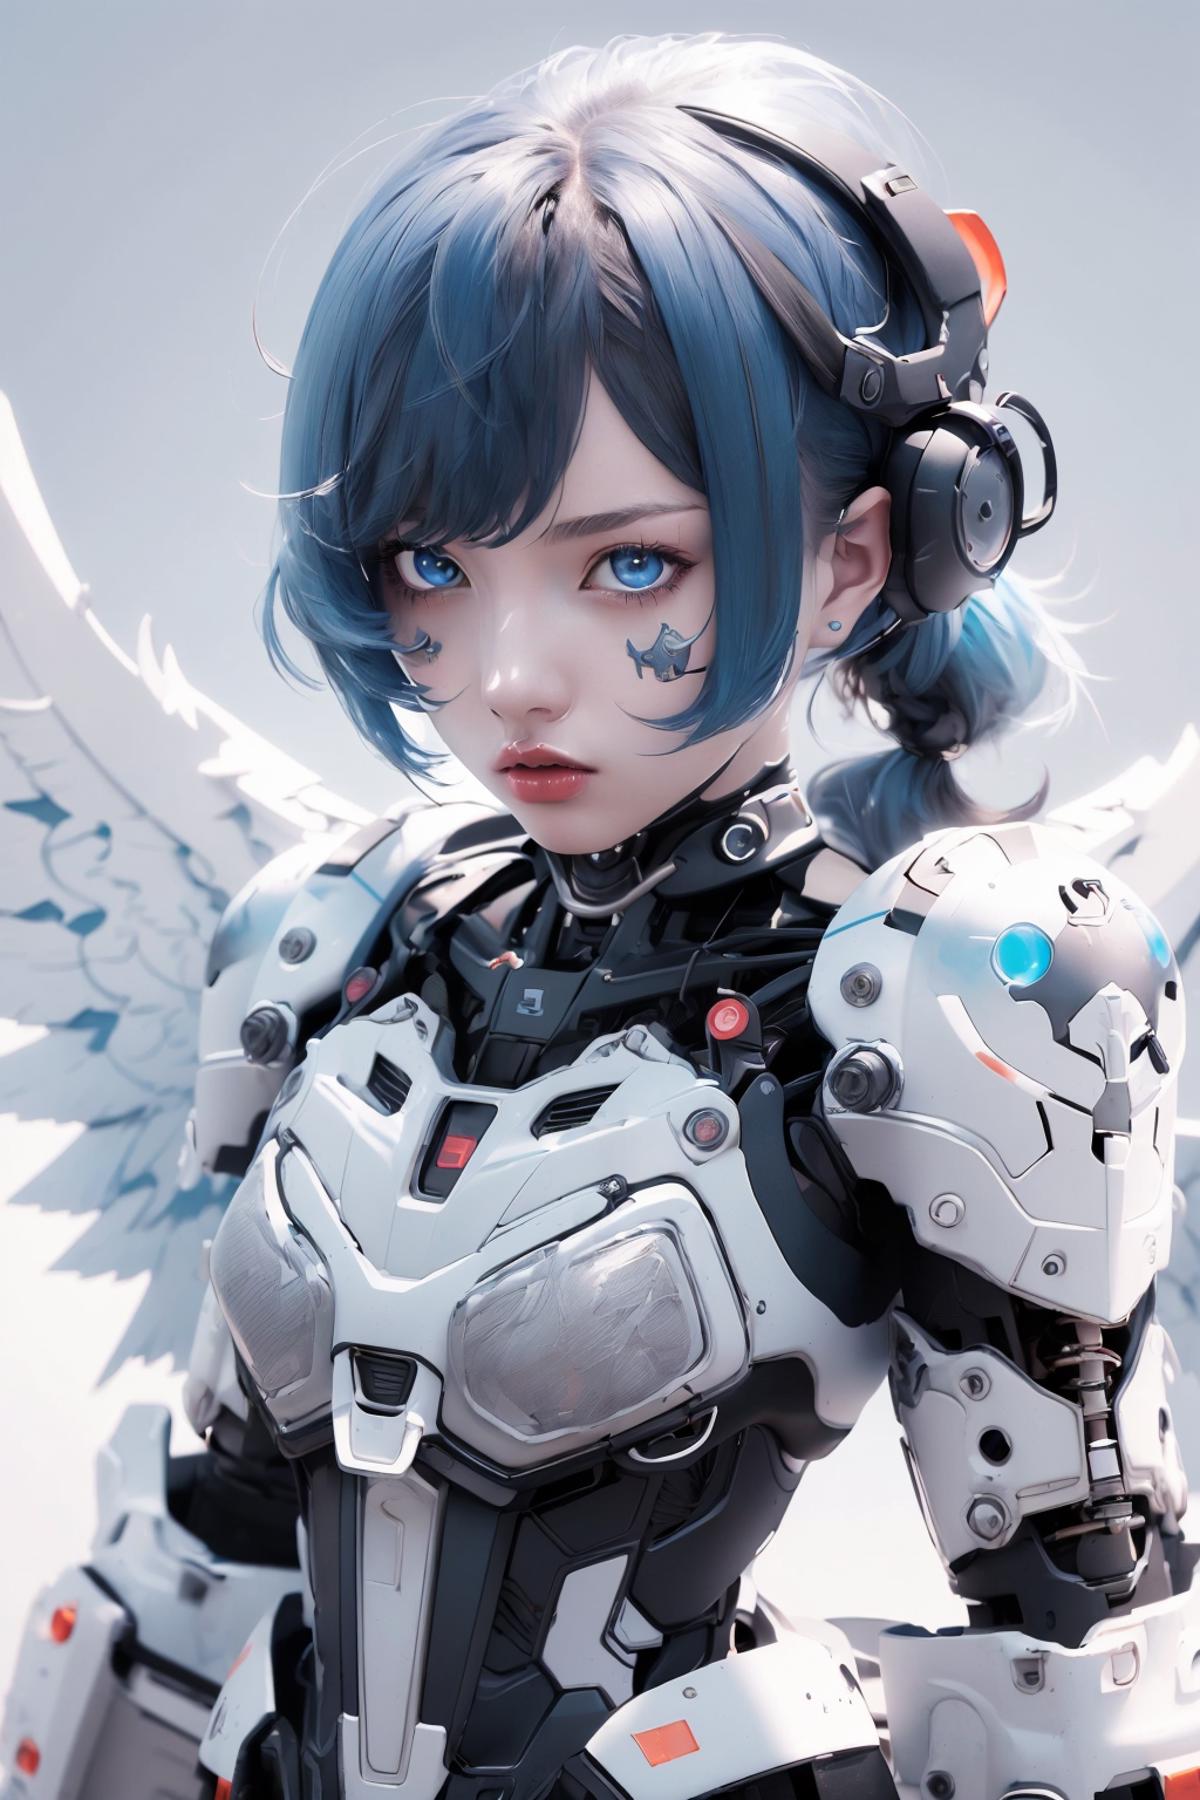 AI model image by PAC_songbai